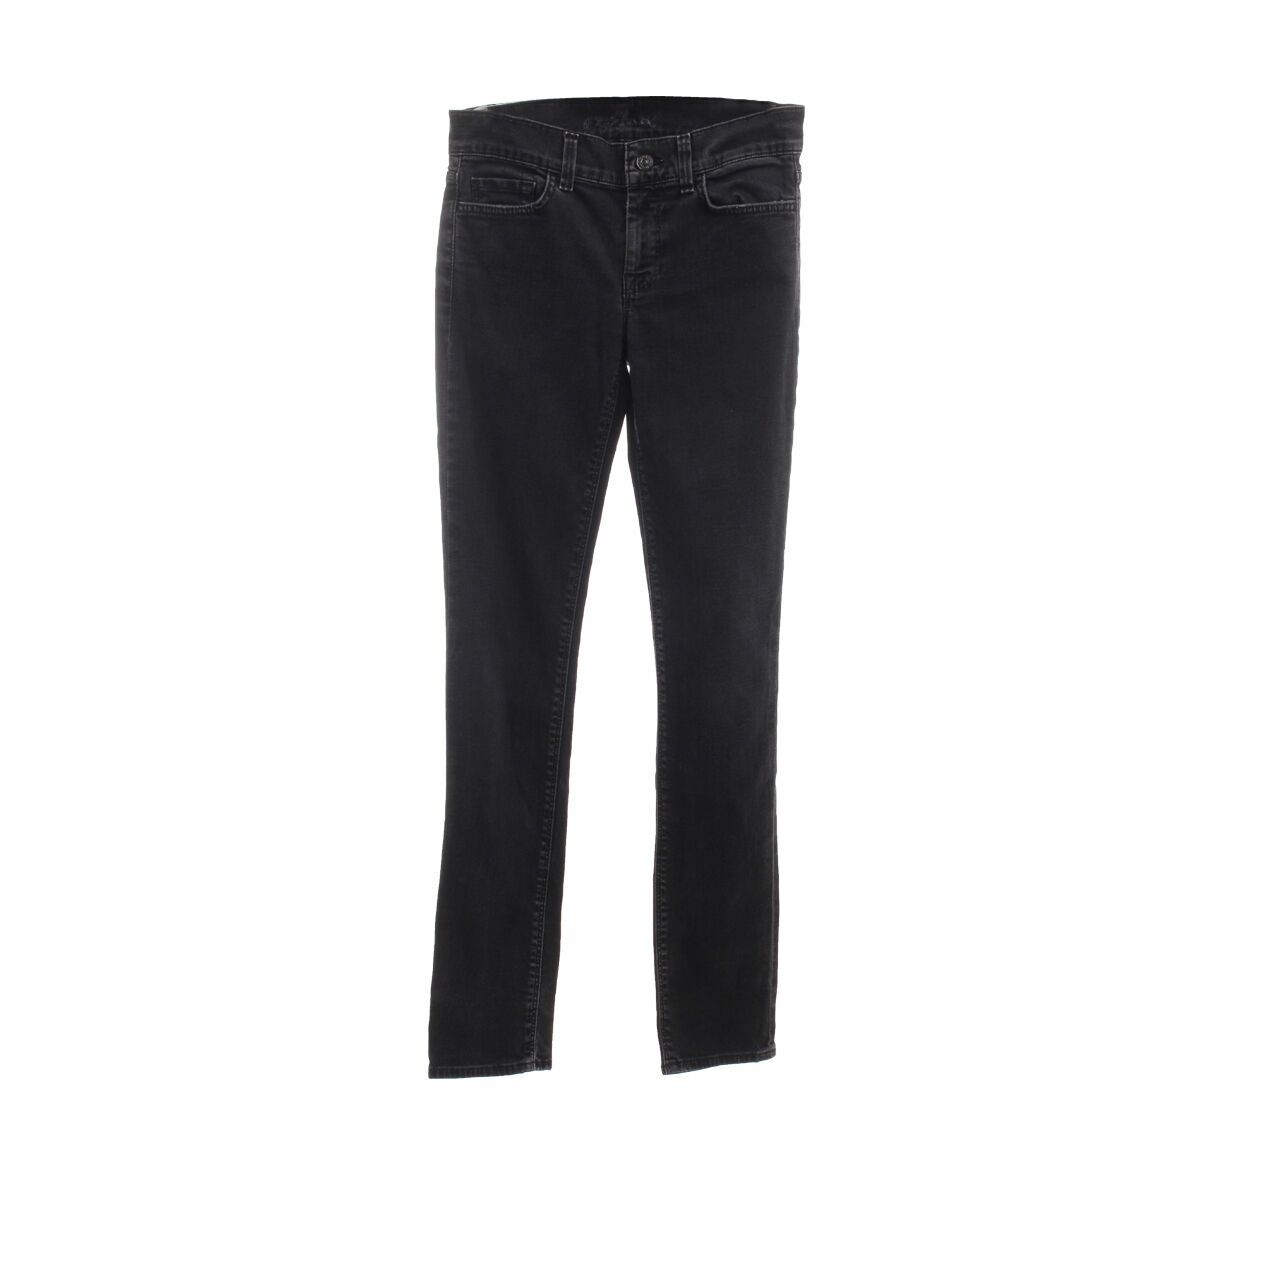 7 For All Mankind Black Long Pants